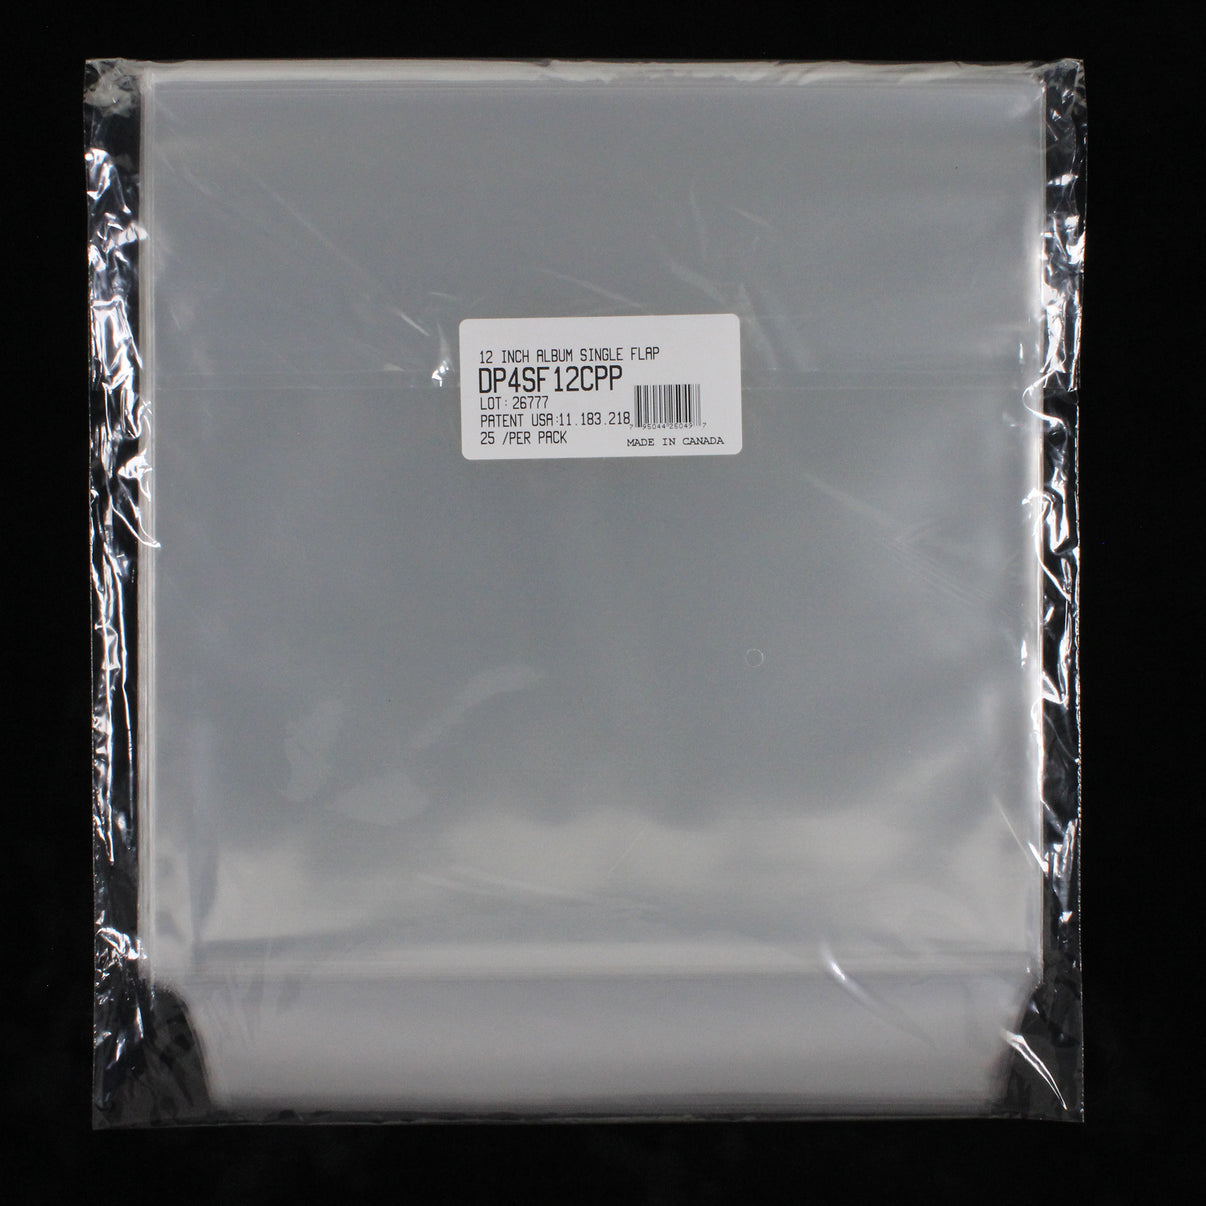 Vinyl Storage Solutions - 12" Dual Pocket Outer Sleeves w/ One Flap - 4mil (25 pack)